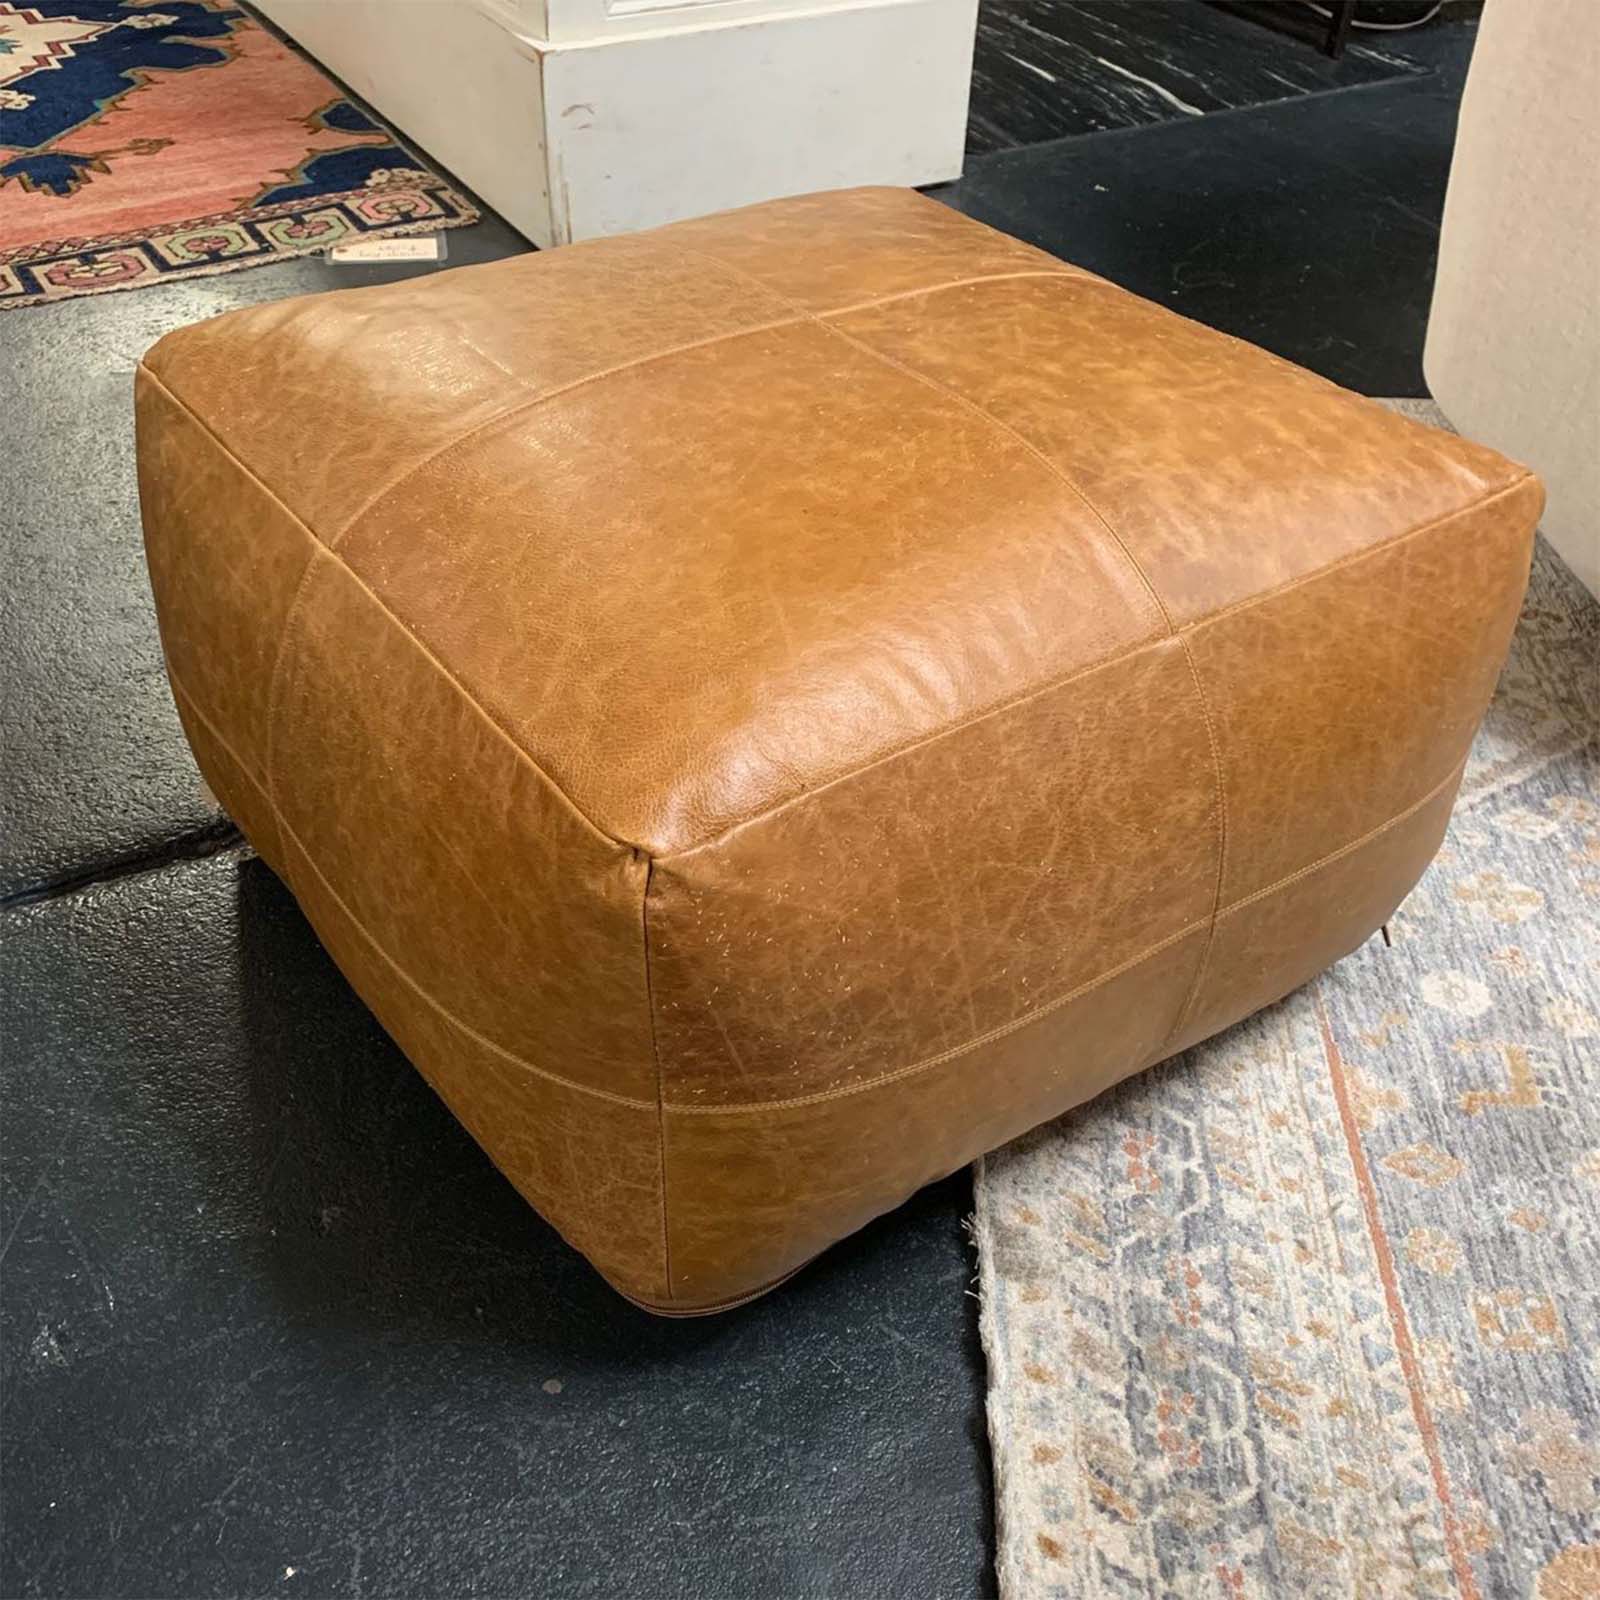 Dupont 24" Leather Pouf